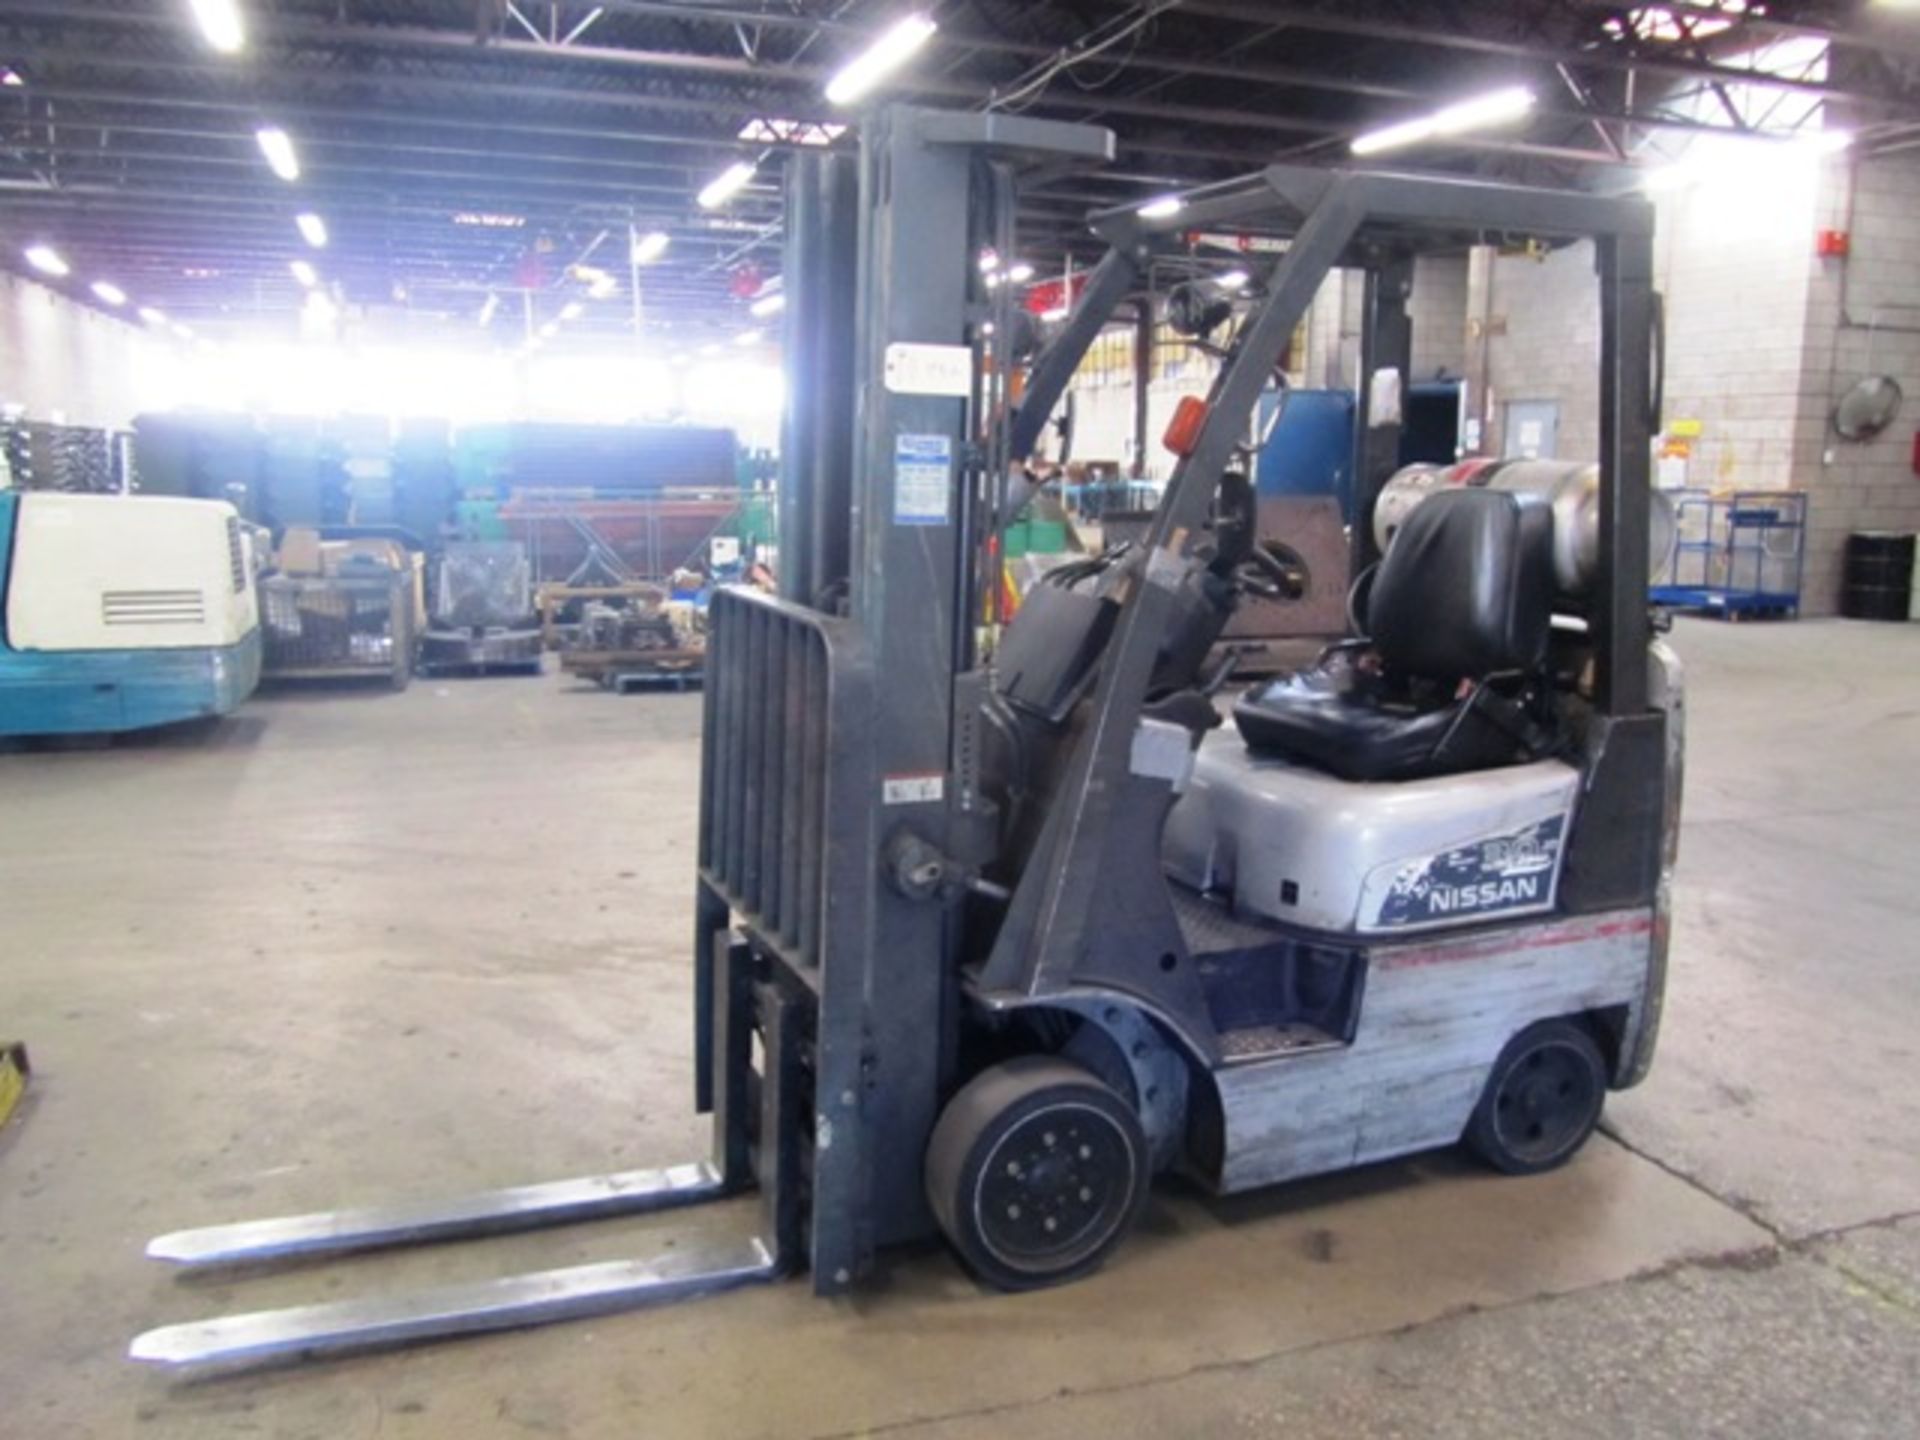 Nissan 30 Model MCP1F1A15LV 2,500lb Capacity LP Forklift with Solid Tires, Side Shift, 3 Stage Mast,